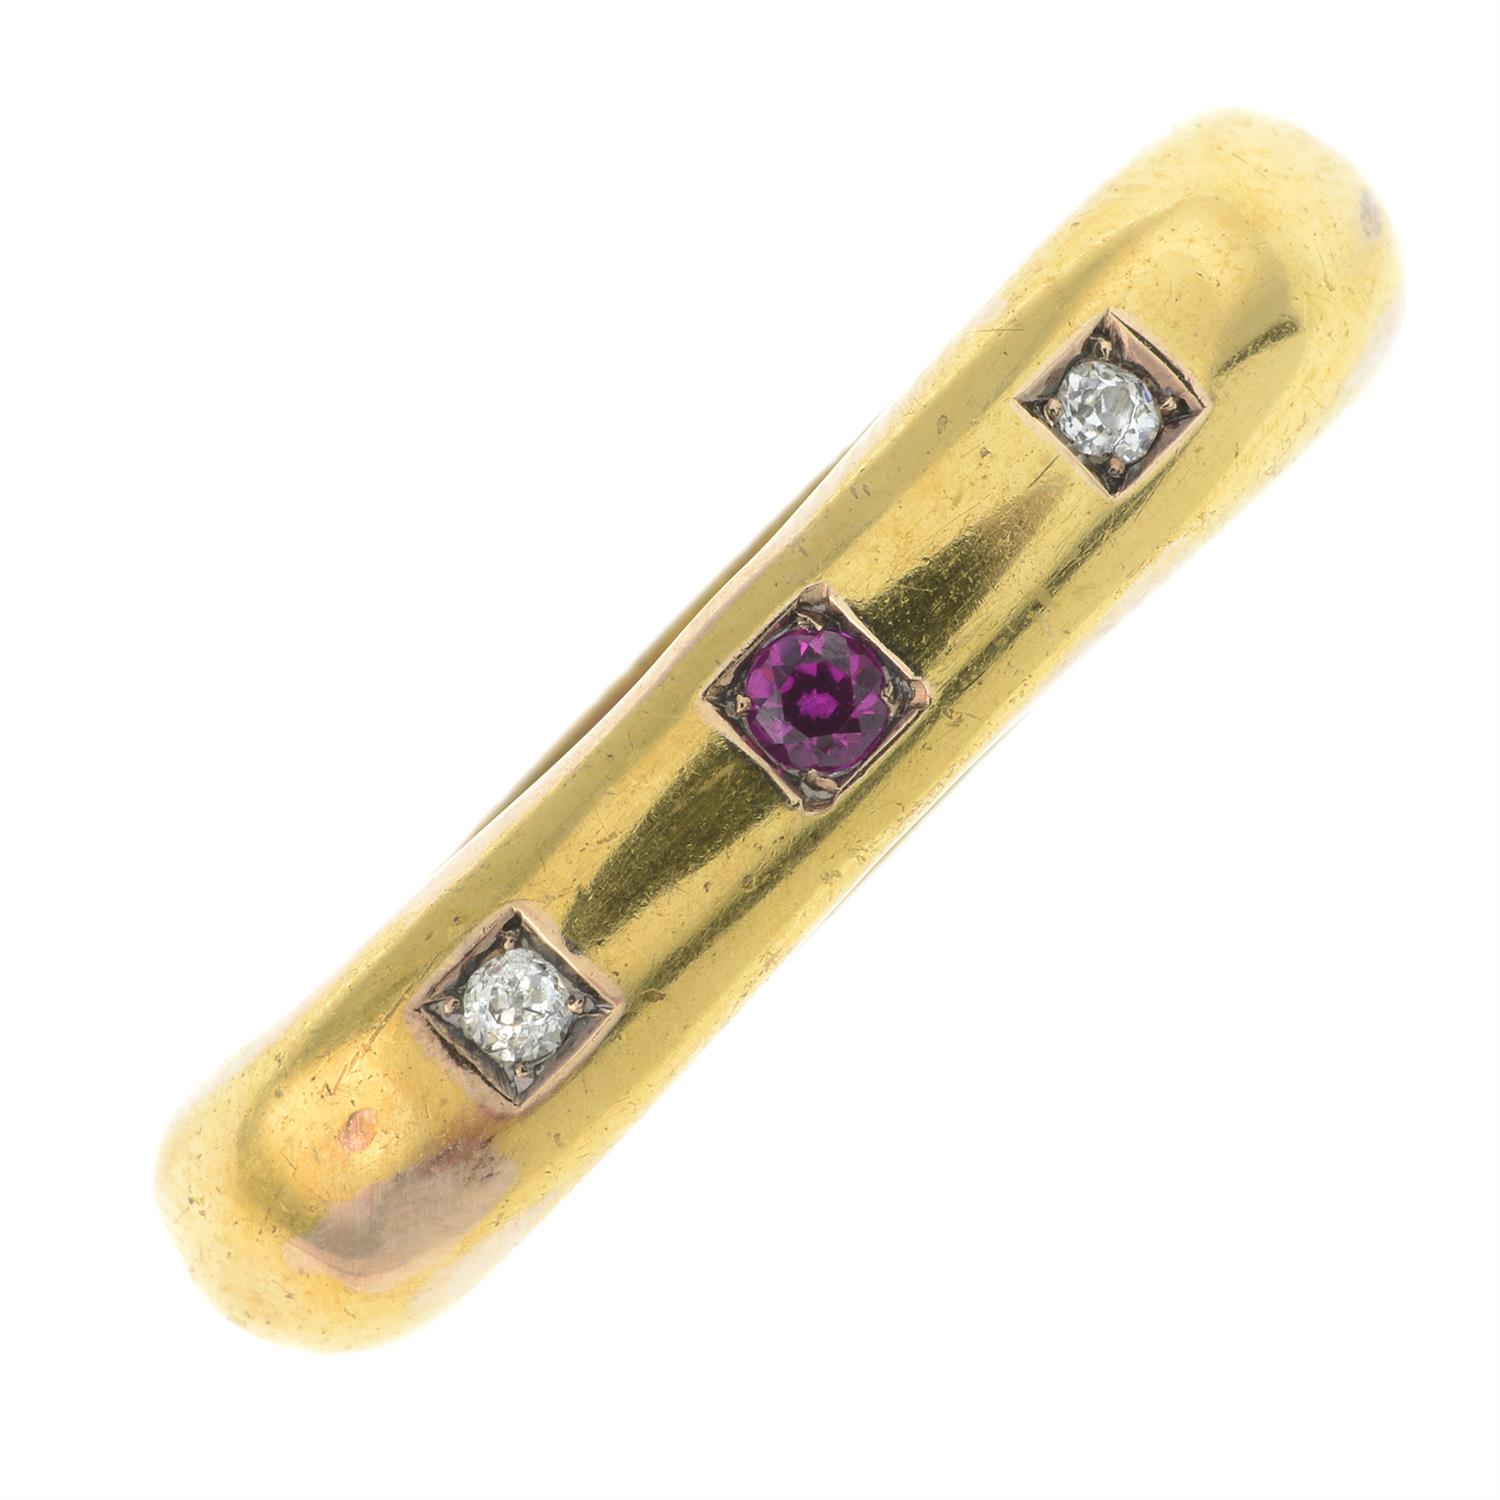 Late 19th century scarf toggle, with synthetic ruby and old-cut diamond highlights.